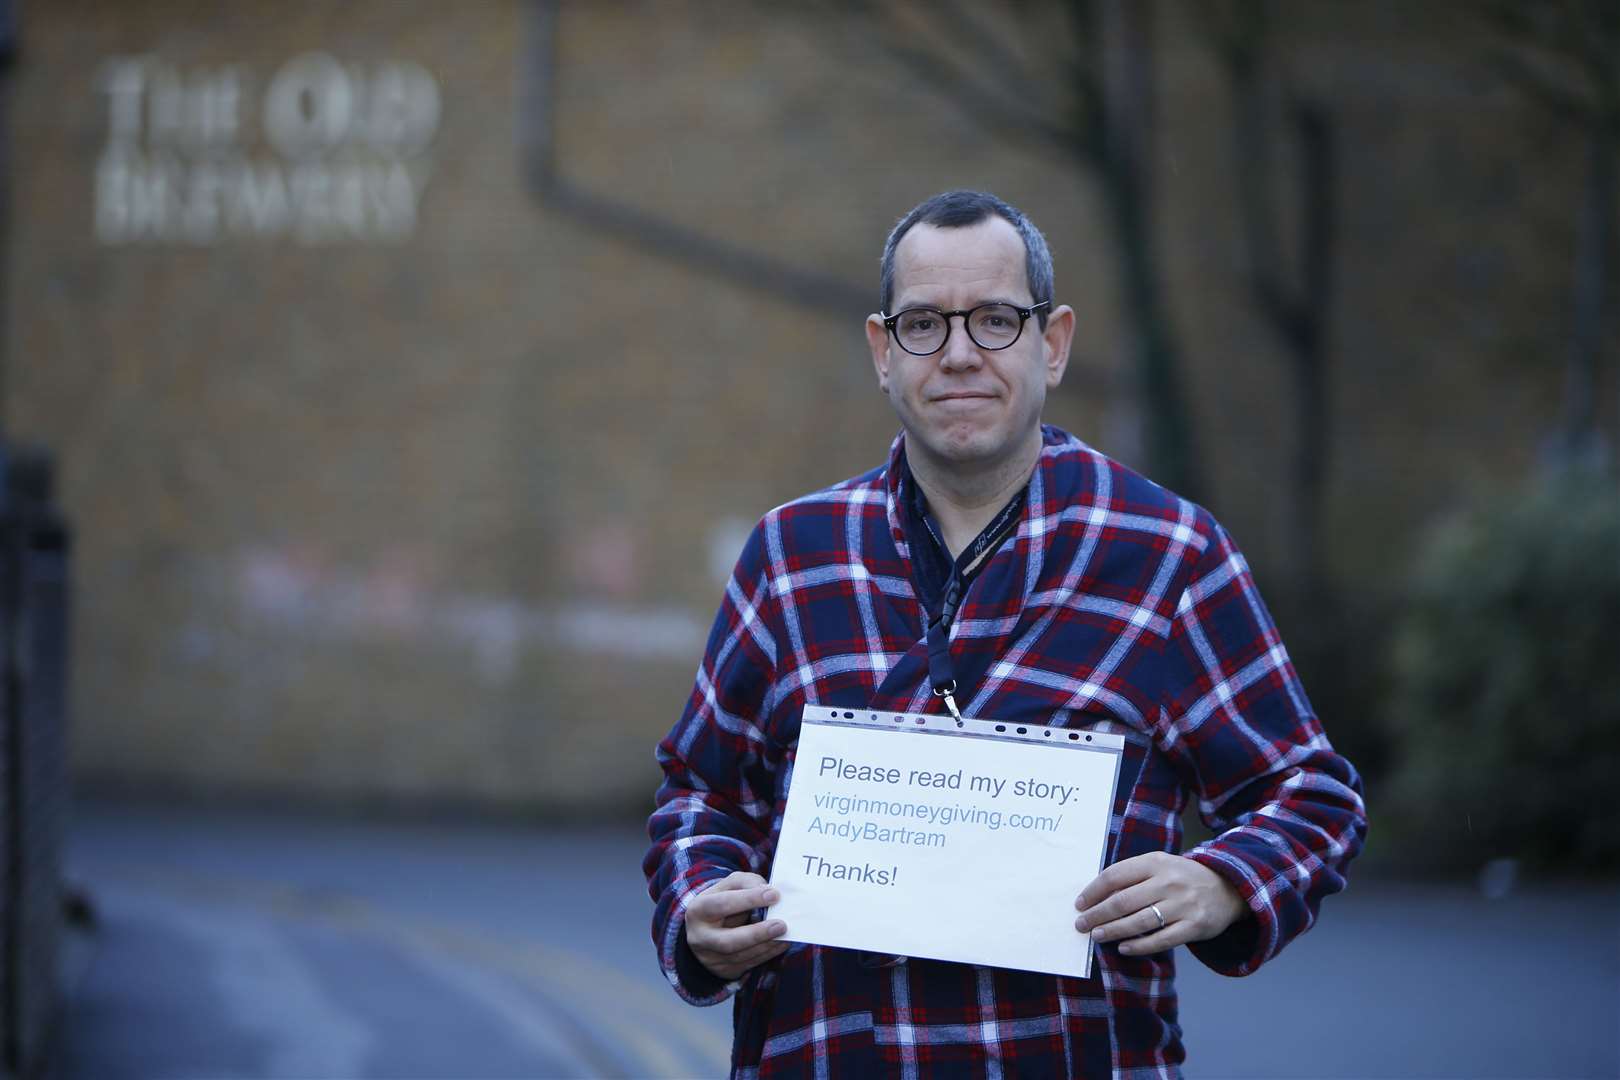 Andy Bartram has been is commuting in pyjamas to raise money for a bereavement service